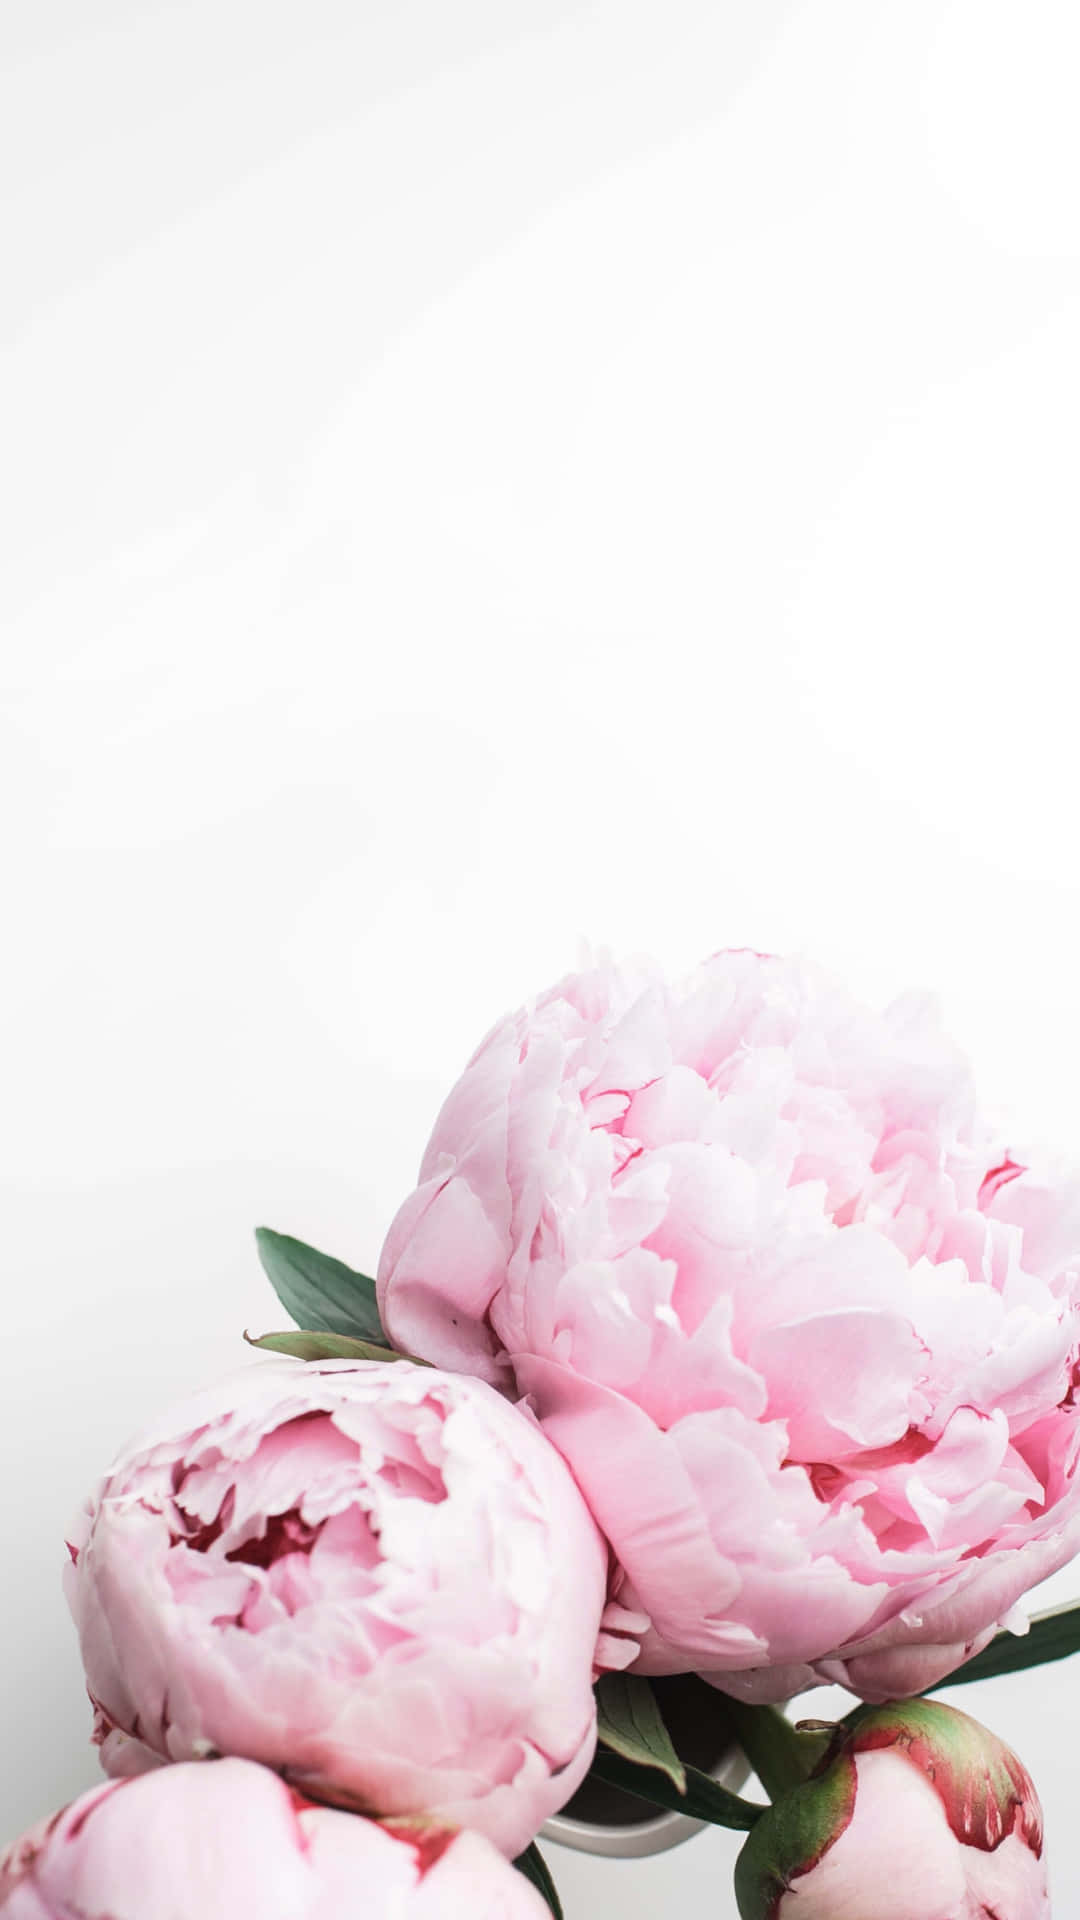 Pink Peonies In A Vase On A White Background Wallpaper